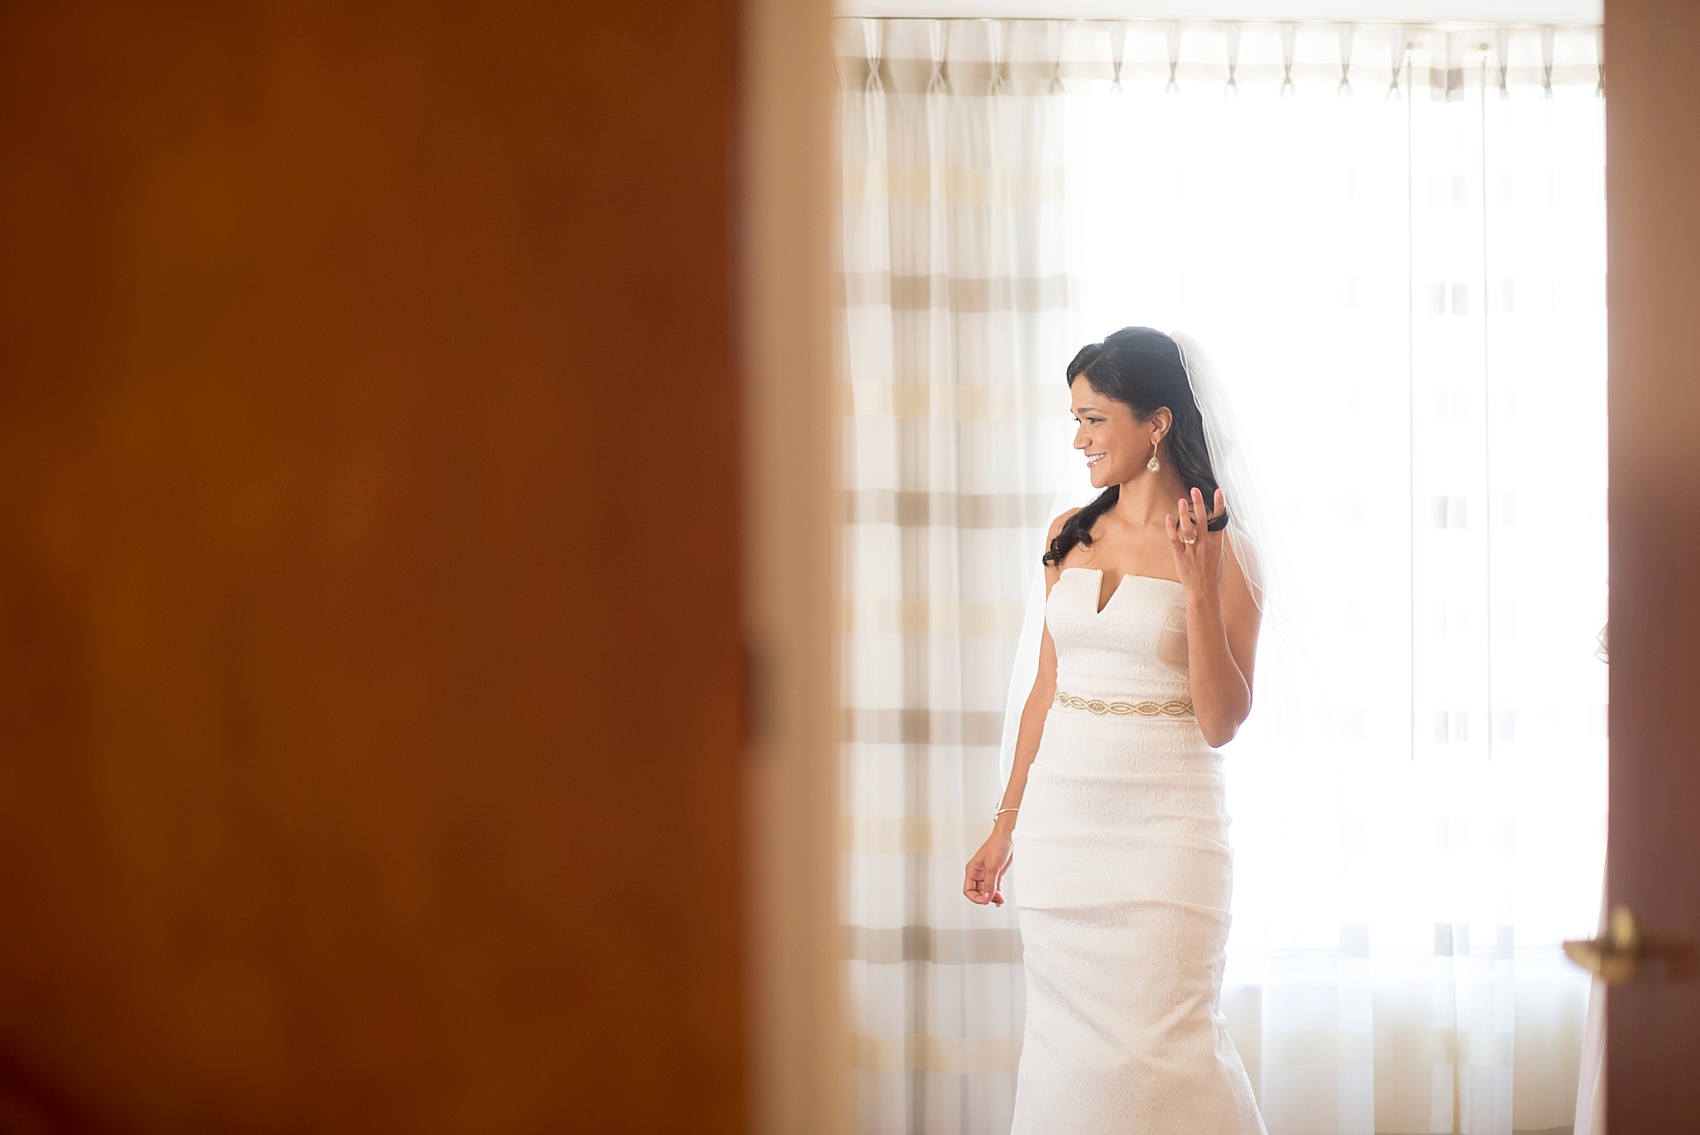 Waveny House Connecticut wedding photos by Mikkel Paige Photography. The bride gets ready for her day.